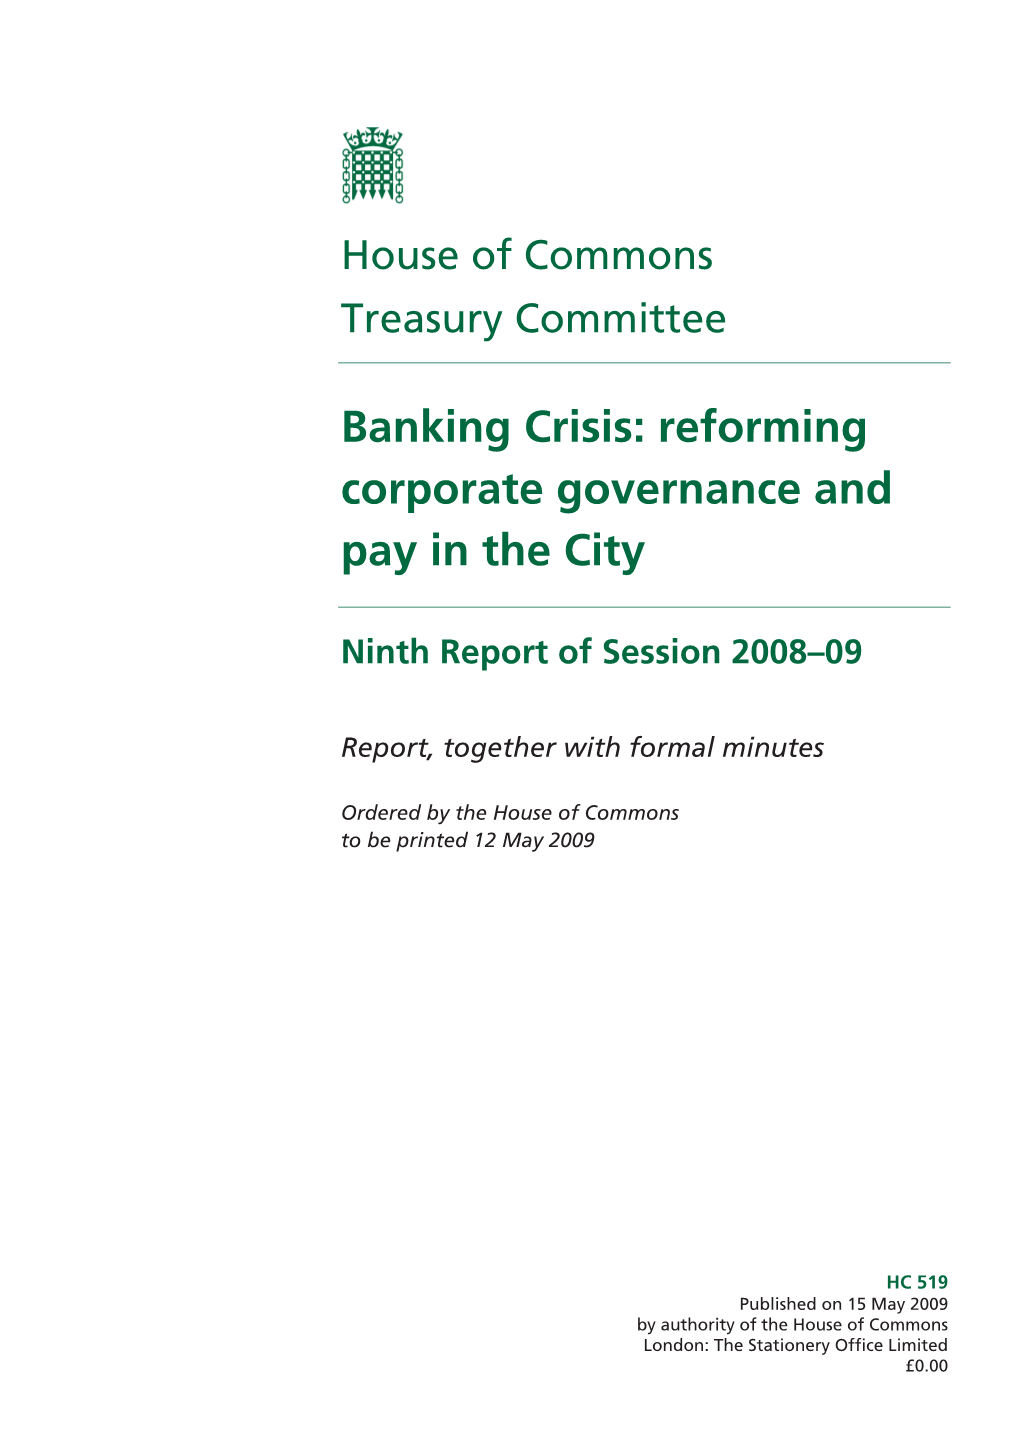 Banking Crisis: Reforming Corporate Governance and Pay in the City